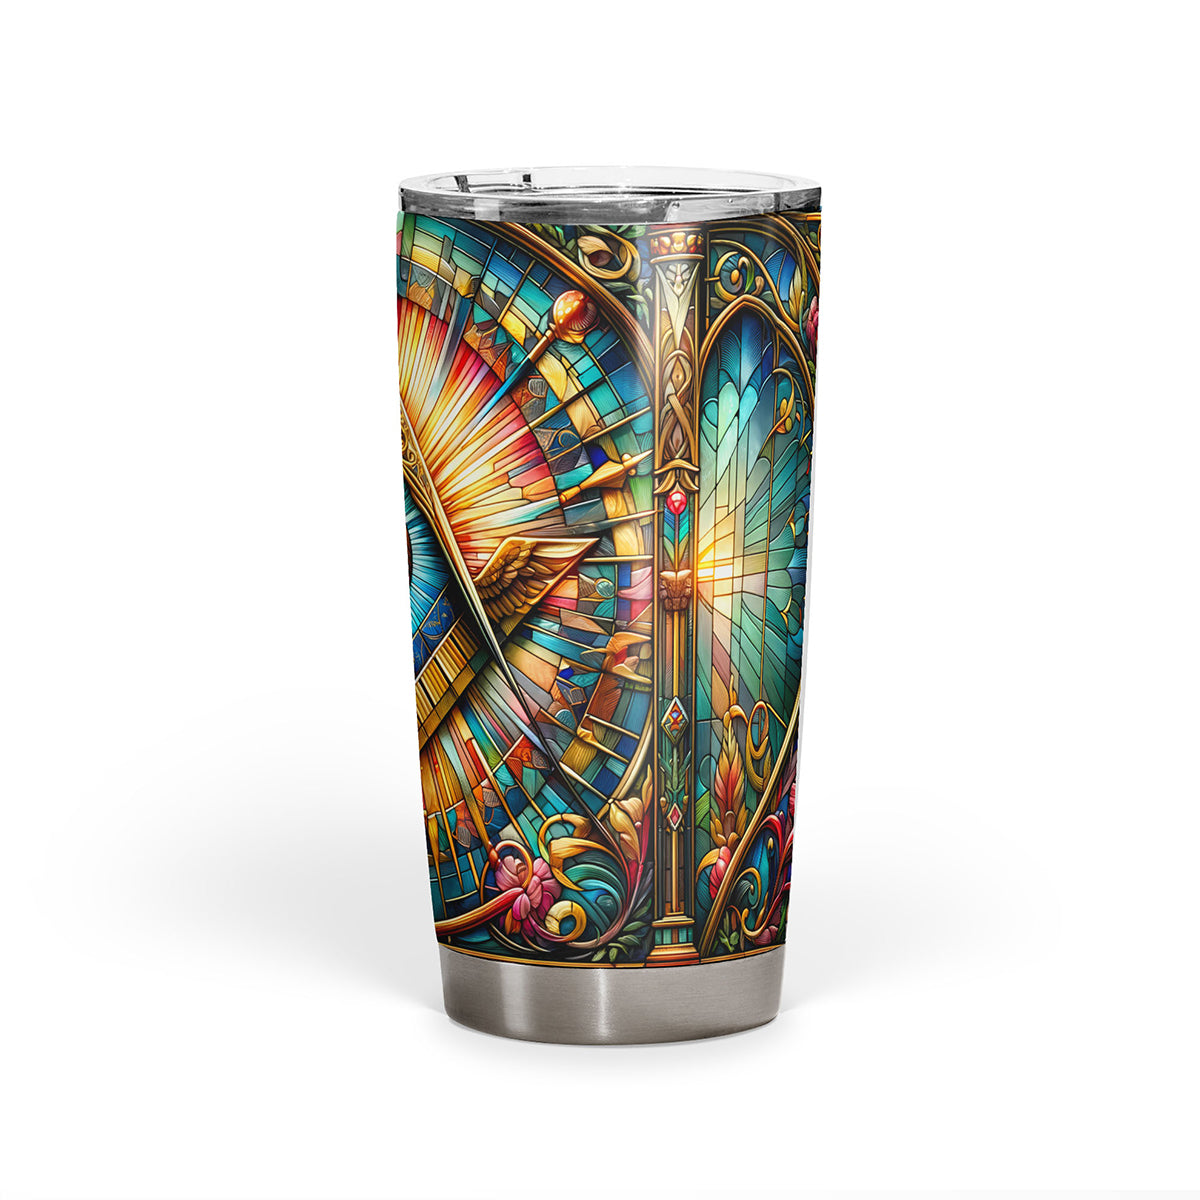 Square & Compass, The All-Seeing Eye Masonic Tumbler